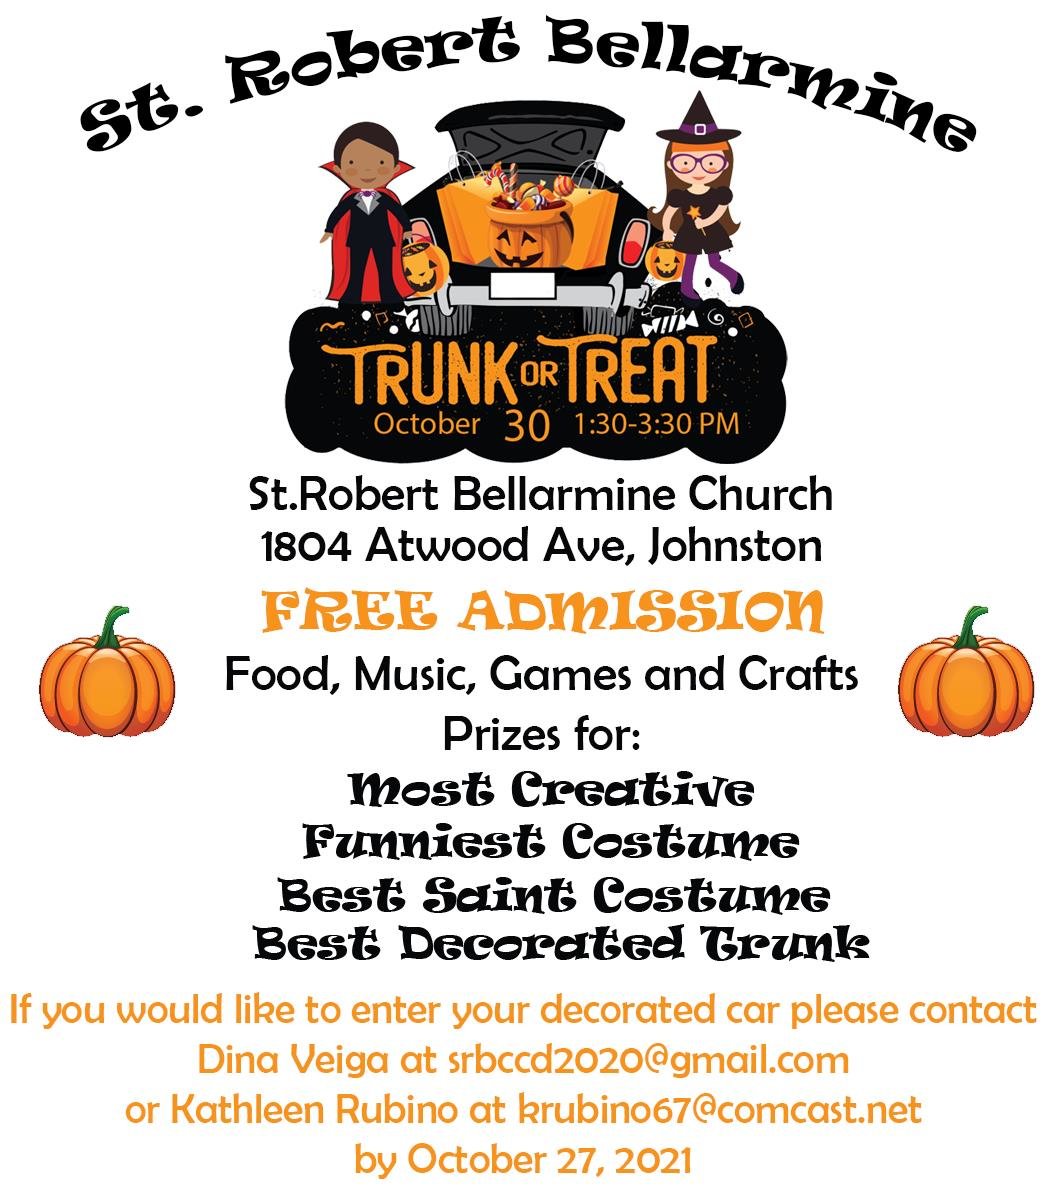 St. Robert’s Bellarmine in Johnston will be holding a Trunk or Treat event on Oct. 30 from 1:30-3:30 p.m.